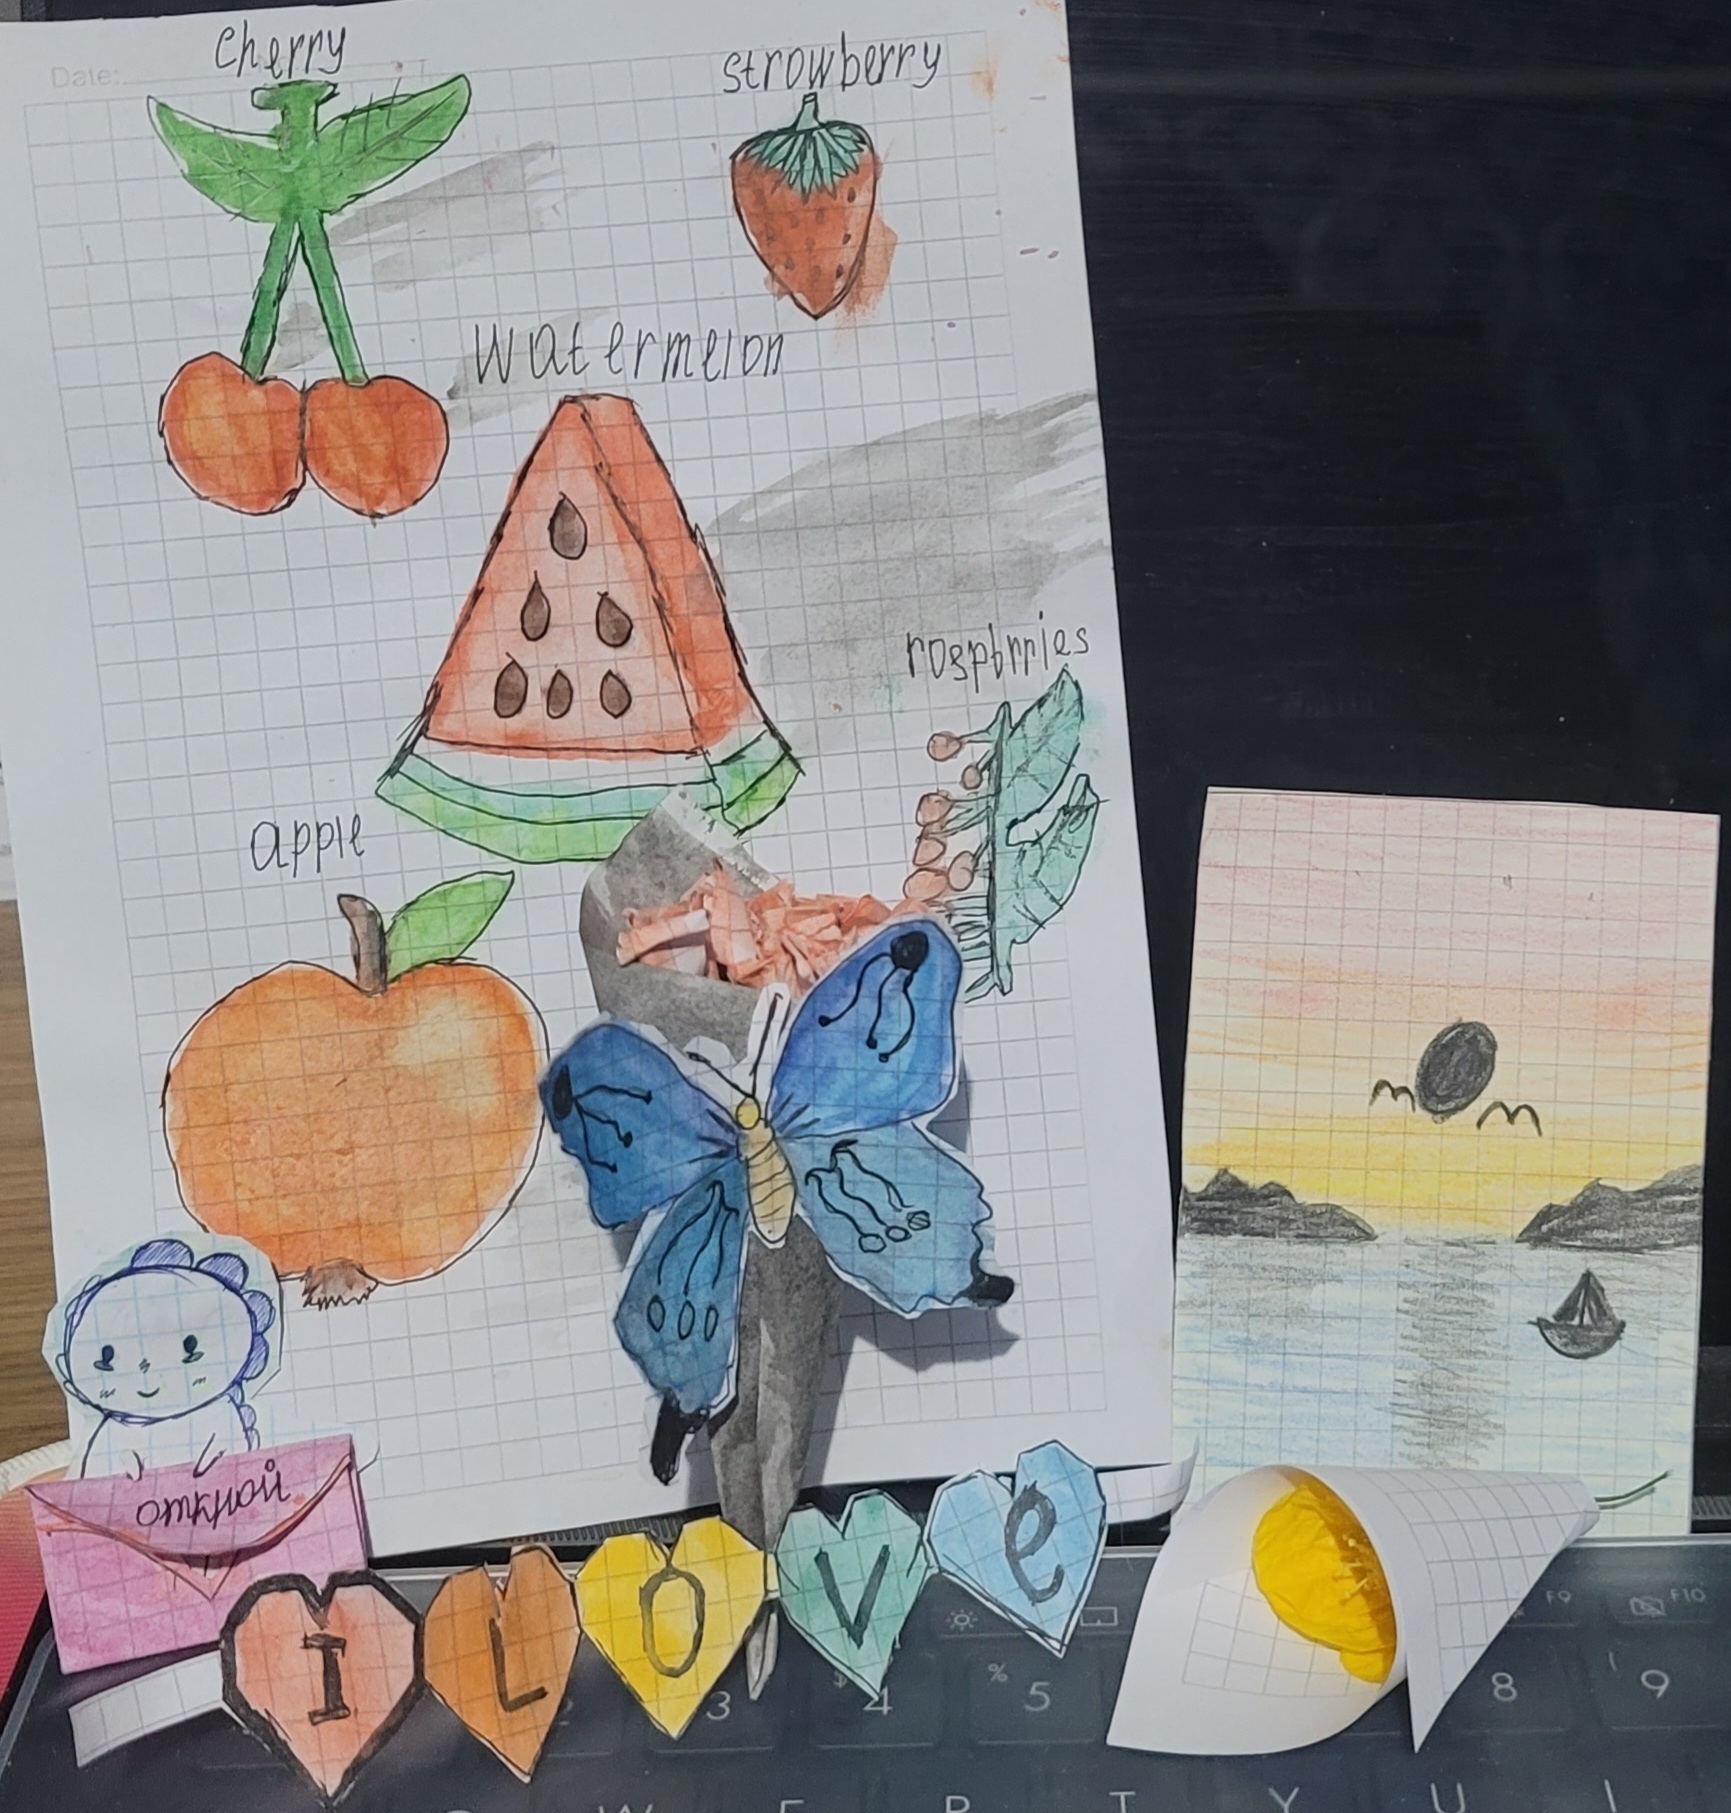 one paper with colored pictures of different fruits labeled in English; picture of a boat on an ocean at sunset; paper bouquet of paper roses with a blue paper butterfly on it; real, small yellow flower in a paper bouquet; I L O V E, each letter in a different colored heart; a drawn dinosaur holding a pink paper envelope which reads 'open' in Russian